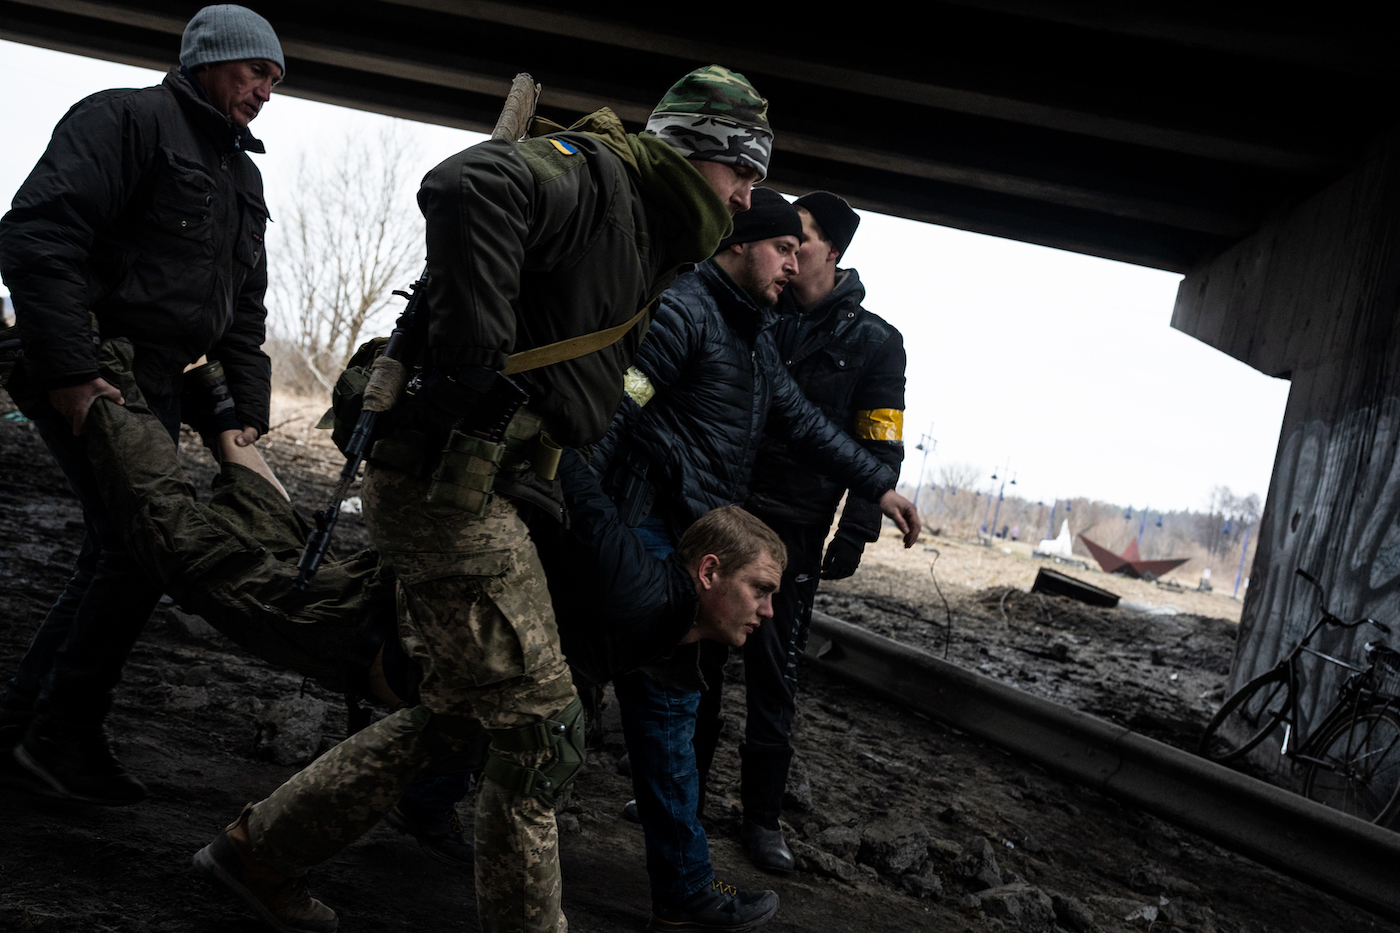 Ukrainian Territorial Defense members carry a Russian POW across the destroyed bridge on the Irpin River in Irpin, Ukraine on March 5, 2022 Wolfgang Schwan - Anadolu Agency